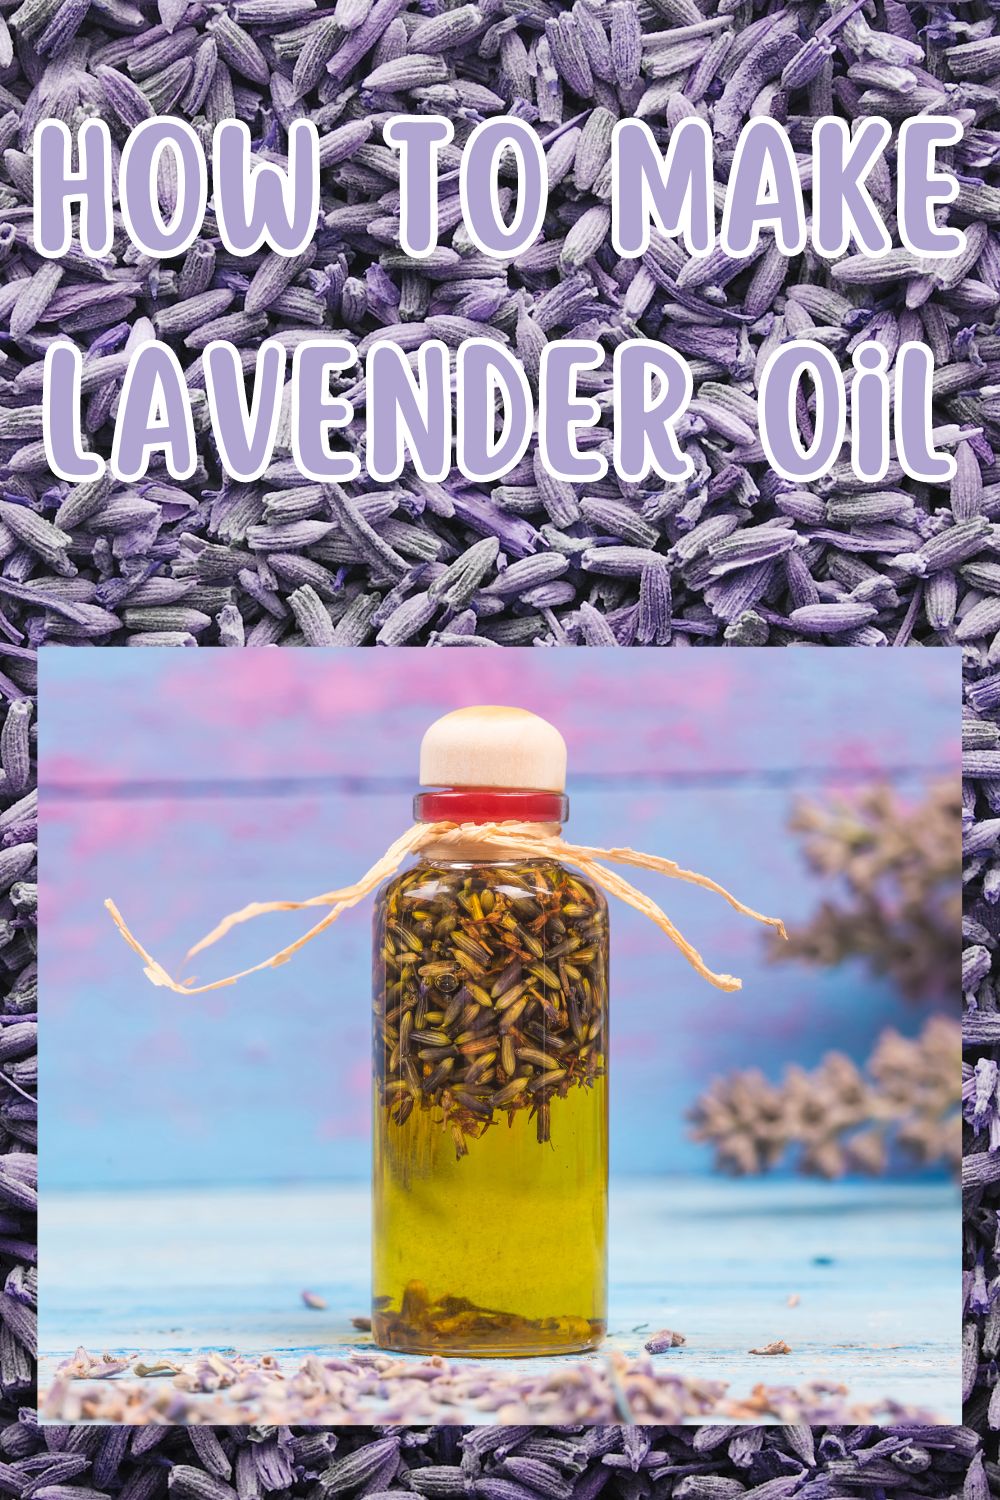 How to make lavender oil.